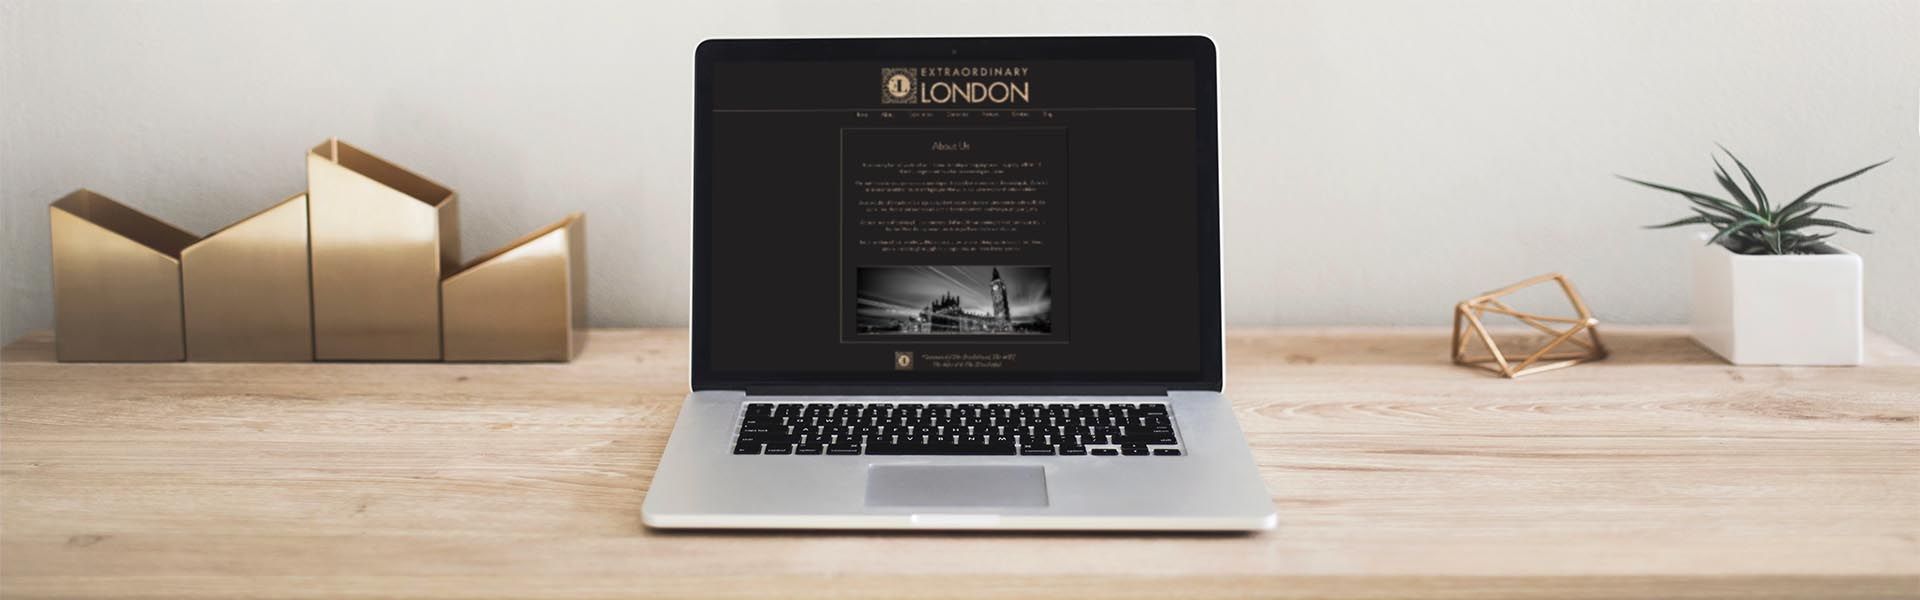 a laptop is open to a page that says extraordinary london